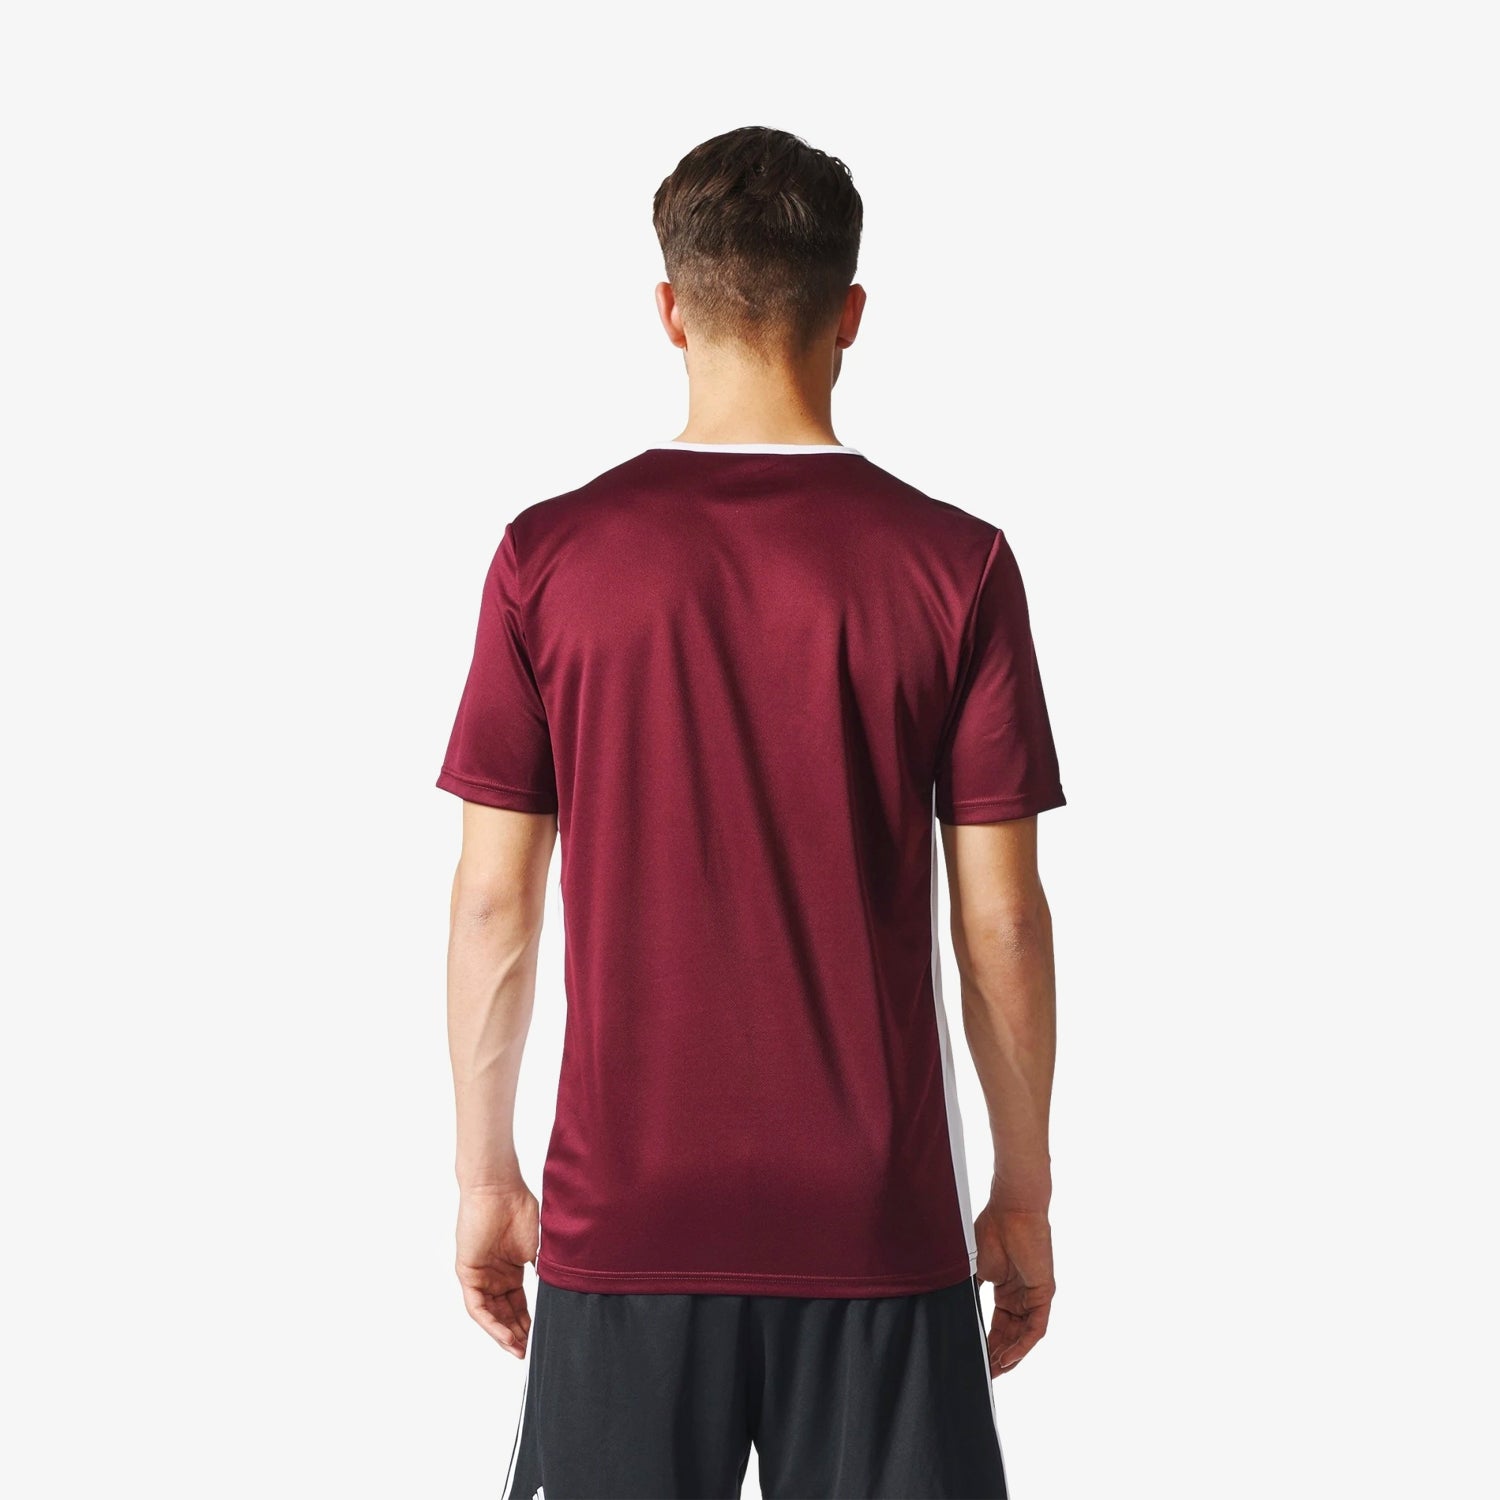 Total Football Direct - Adidas Entrada 18 Jersey - Maroon / White